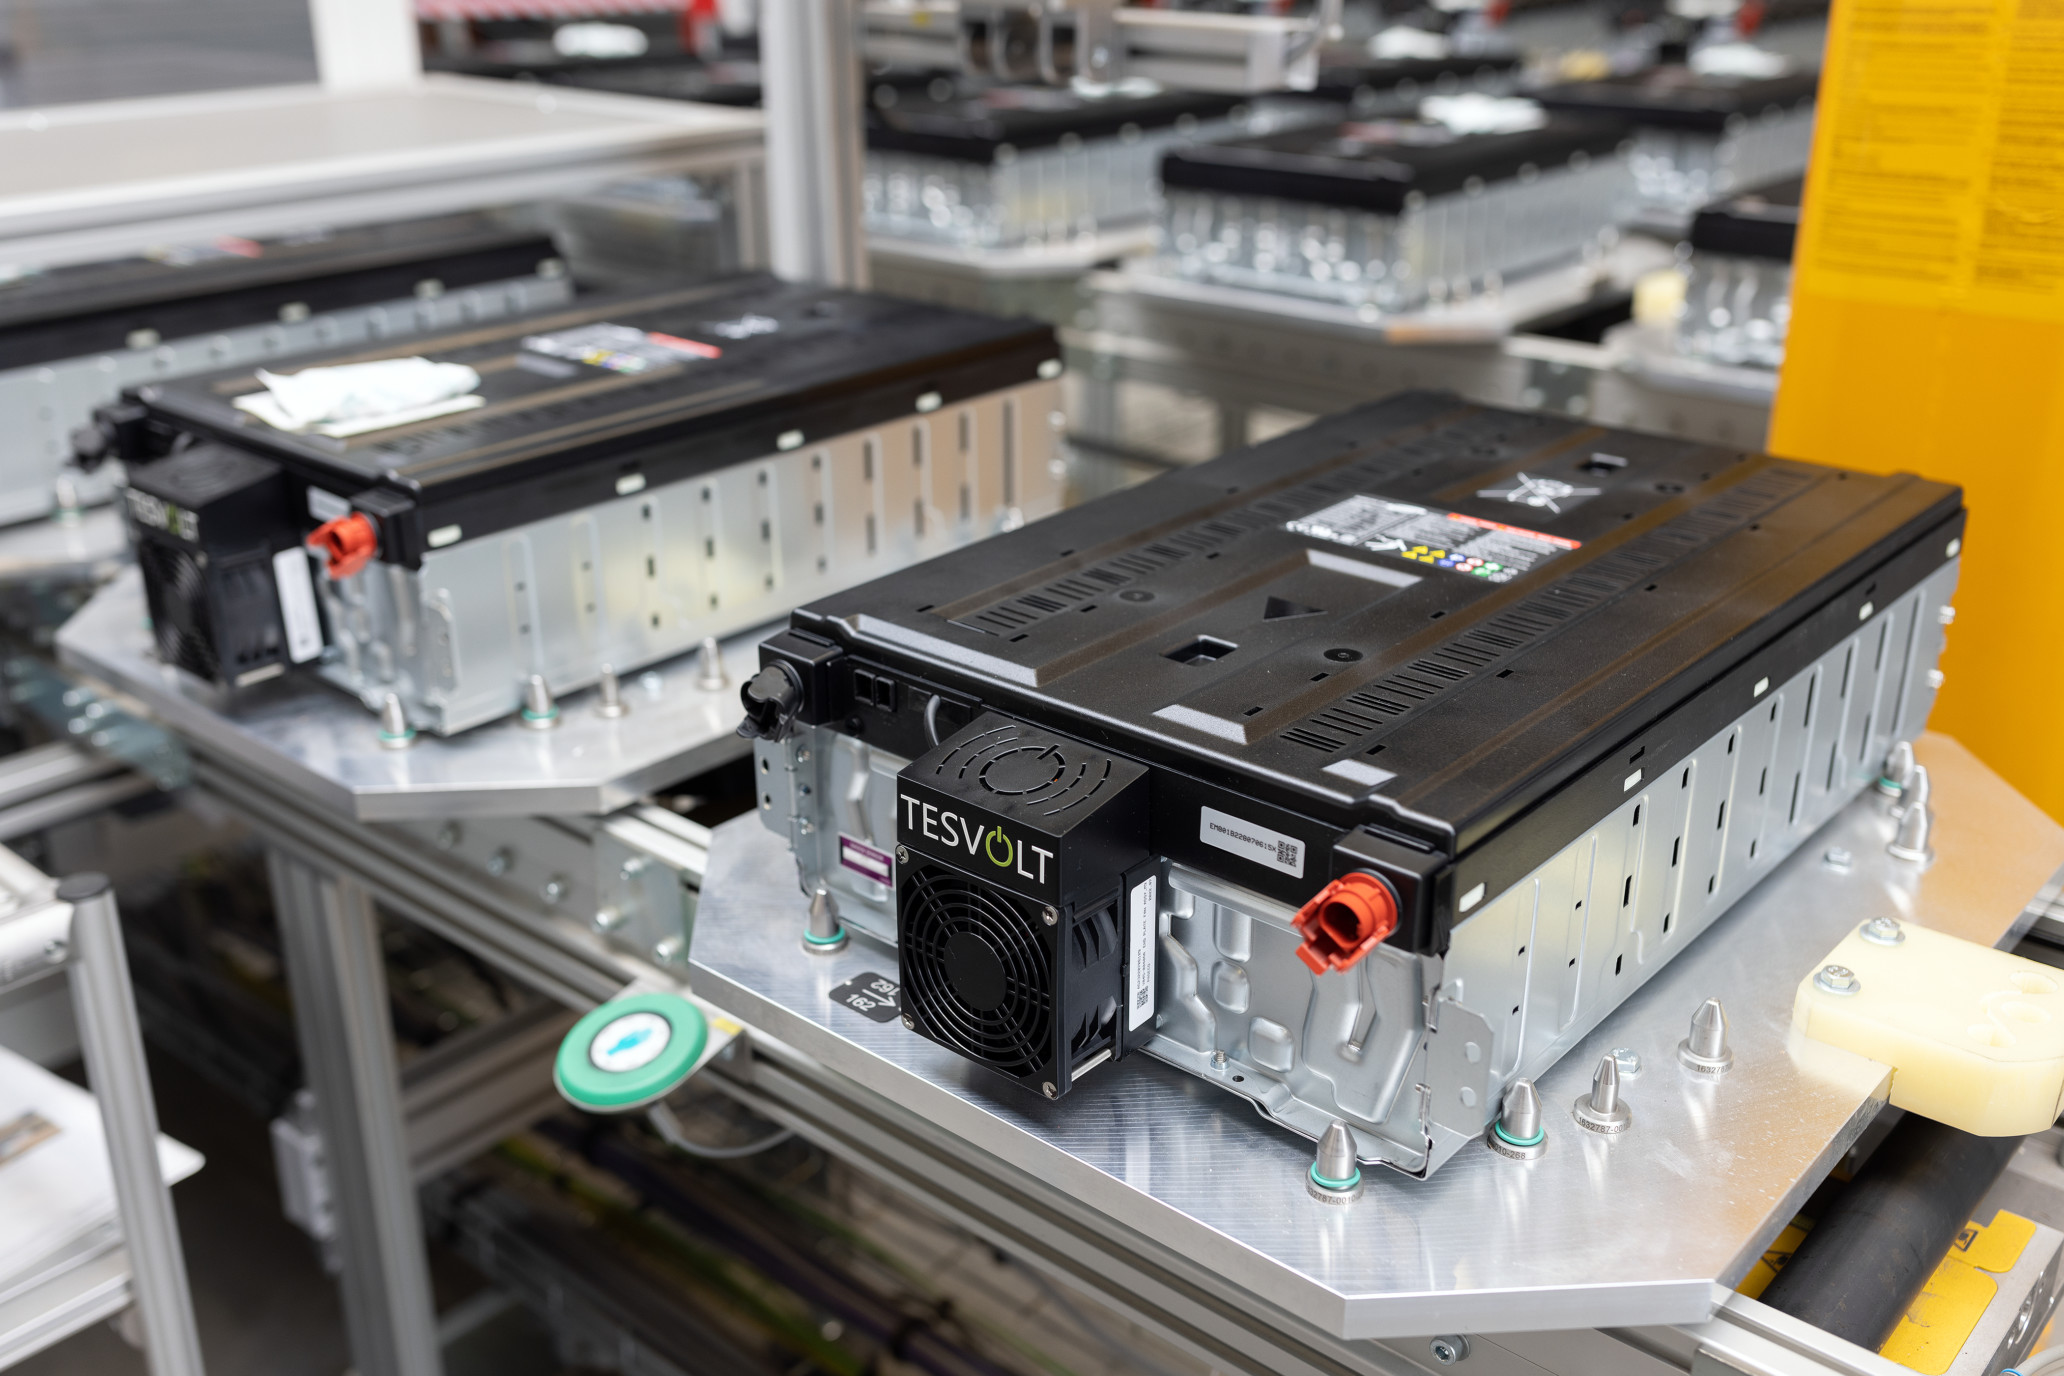 Tesvolt battery storage systems are among the safest in Europe